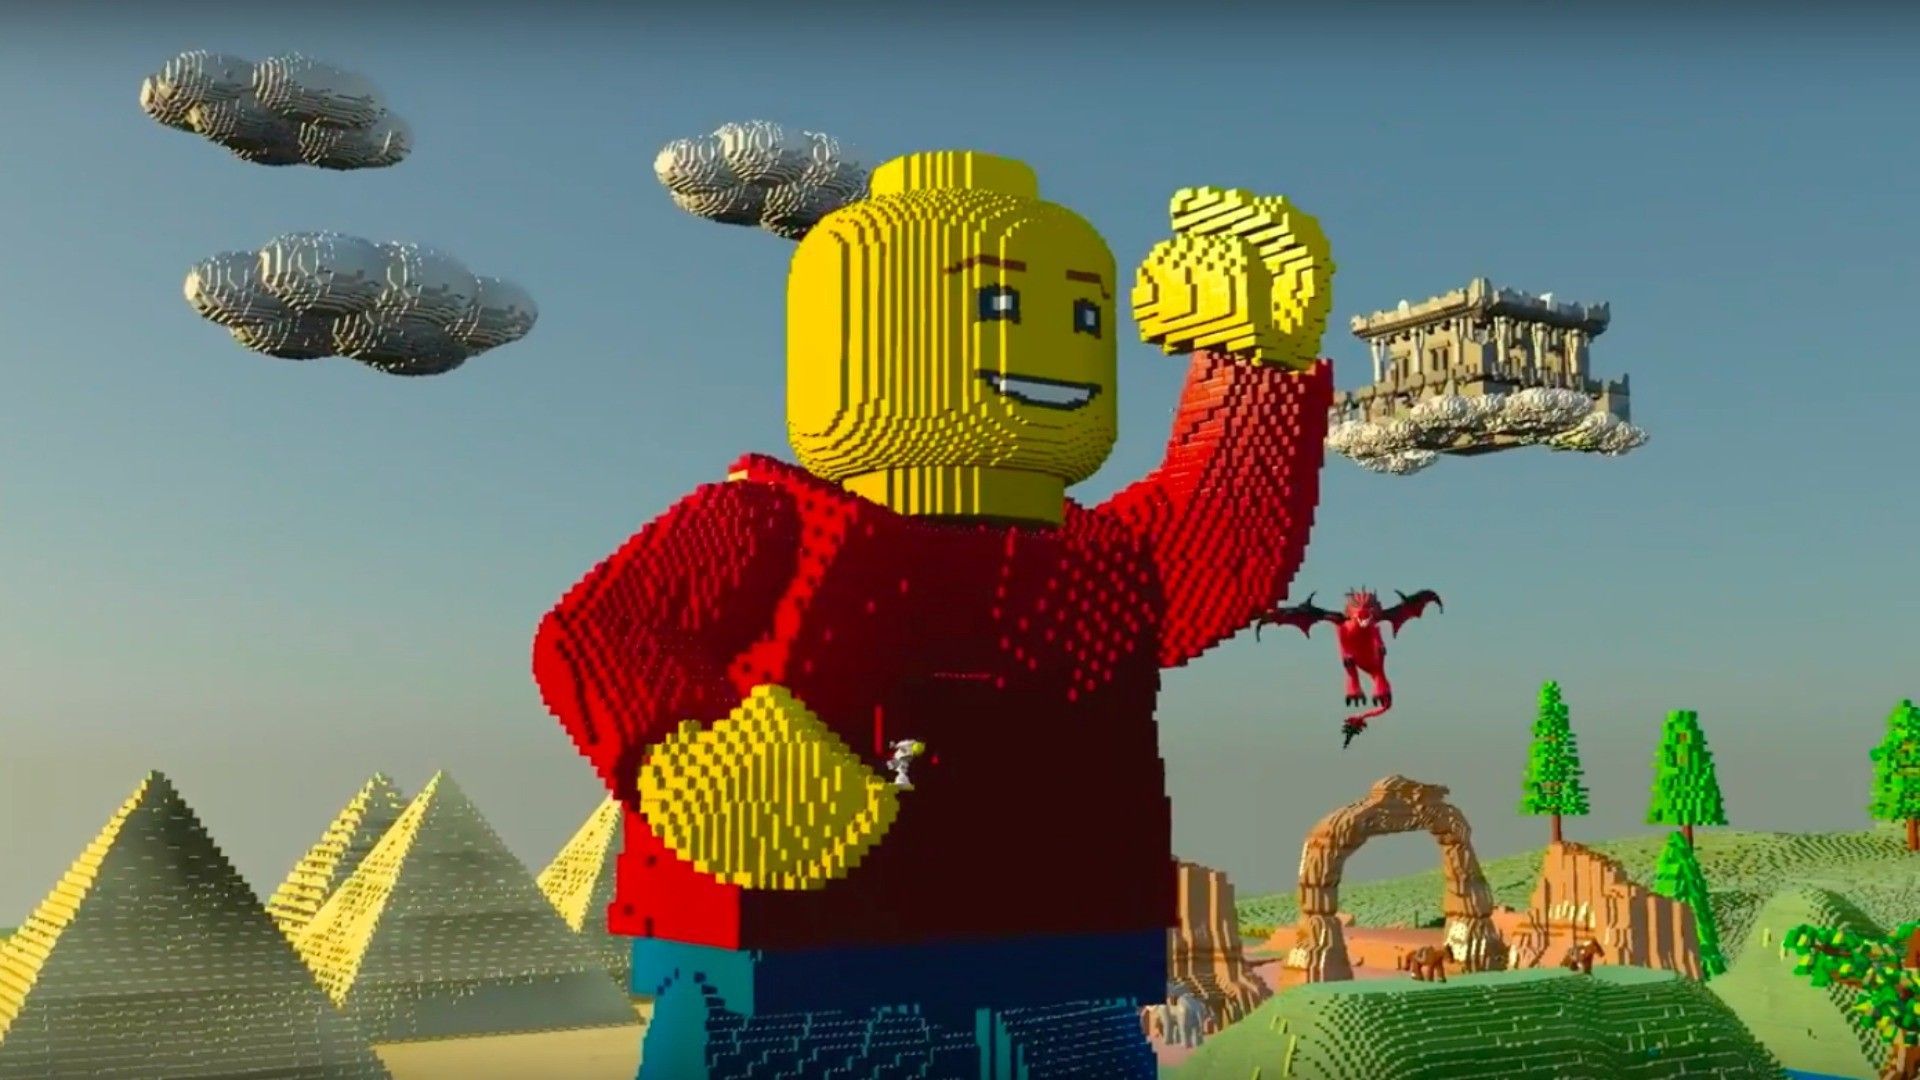 LEGO Worlds Lets You Become A Master Builder With LEGO Bricks.